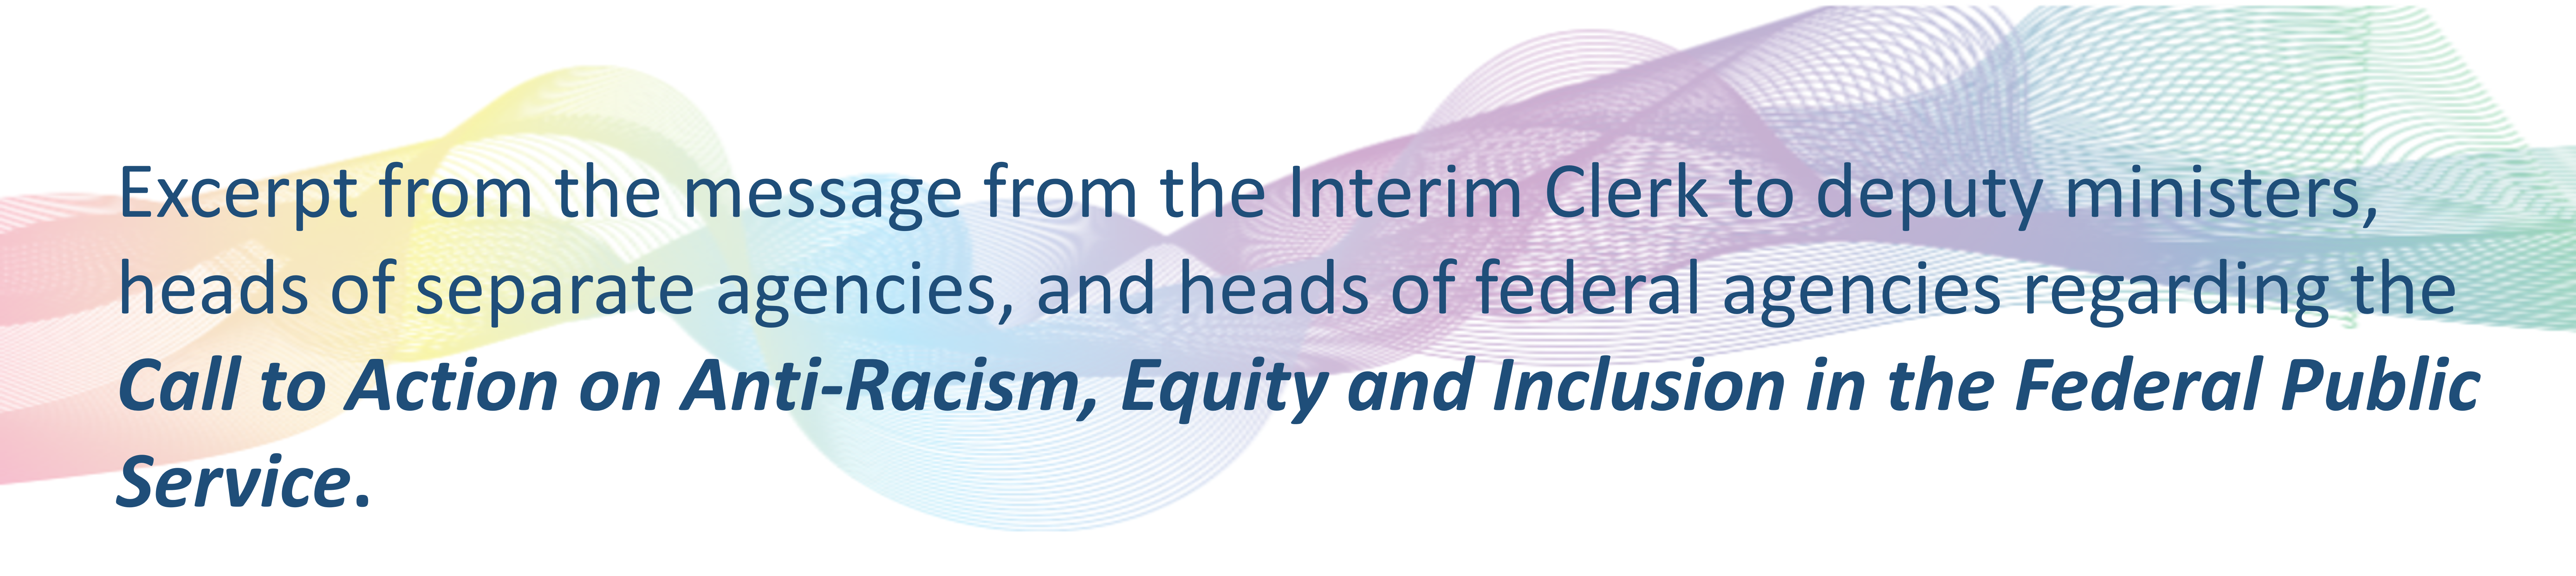 Call to Action on Anti-Racism, Equity, and Inclusion in the Federal Public Service